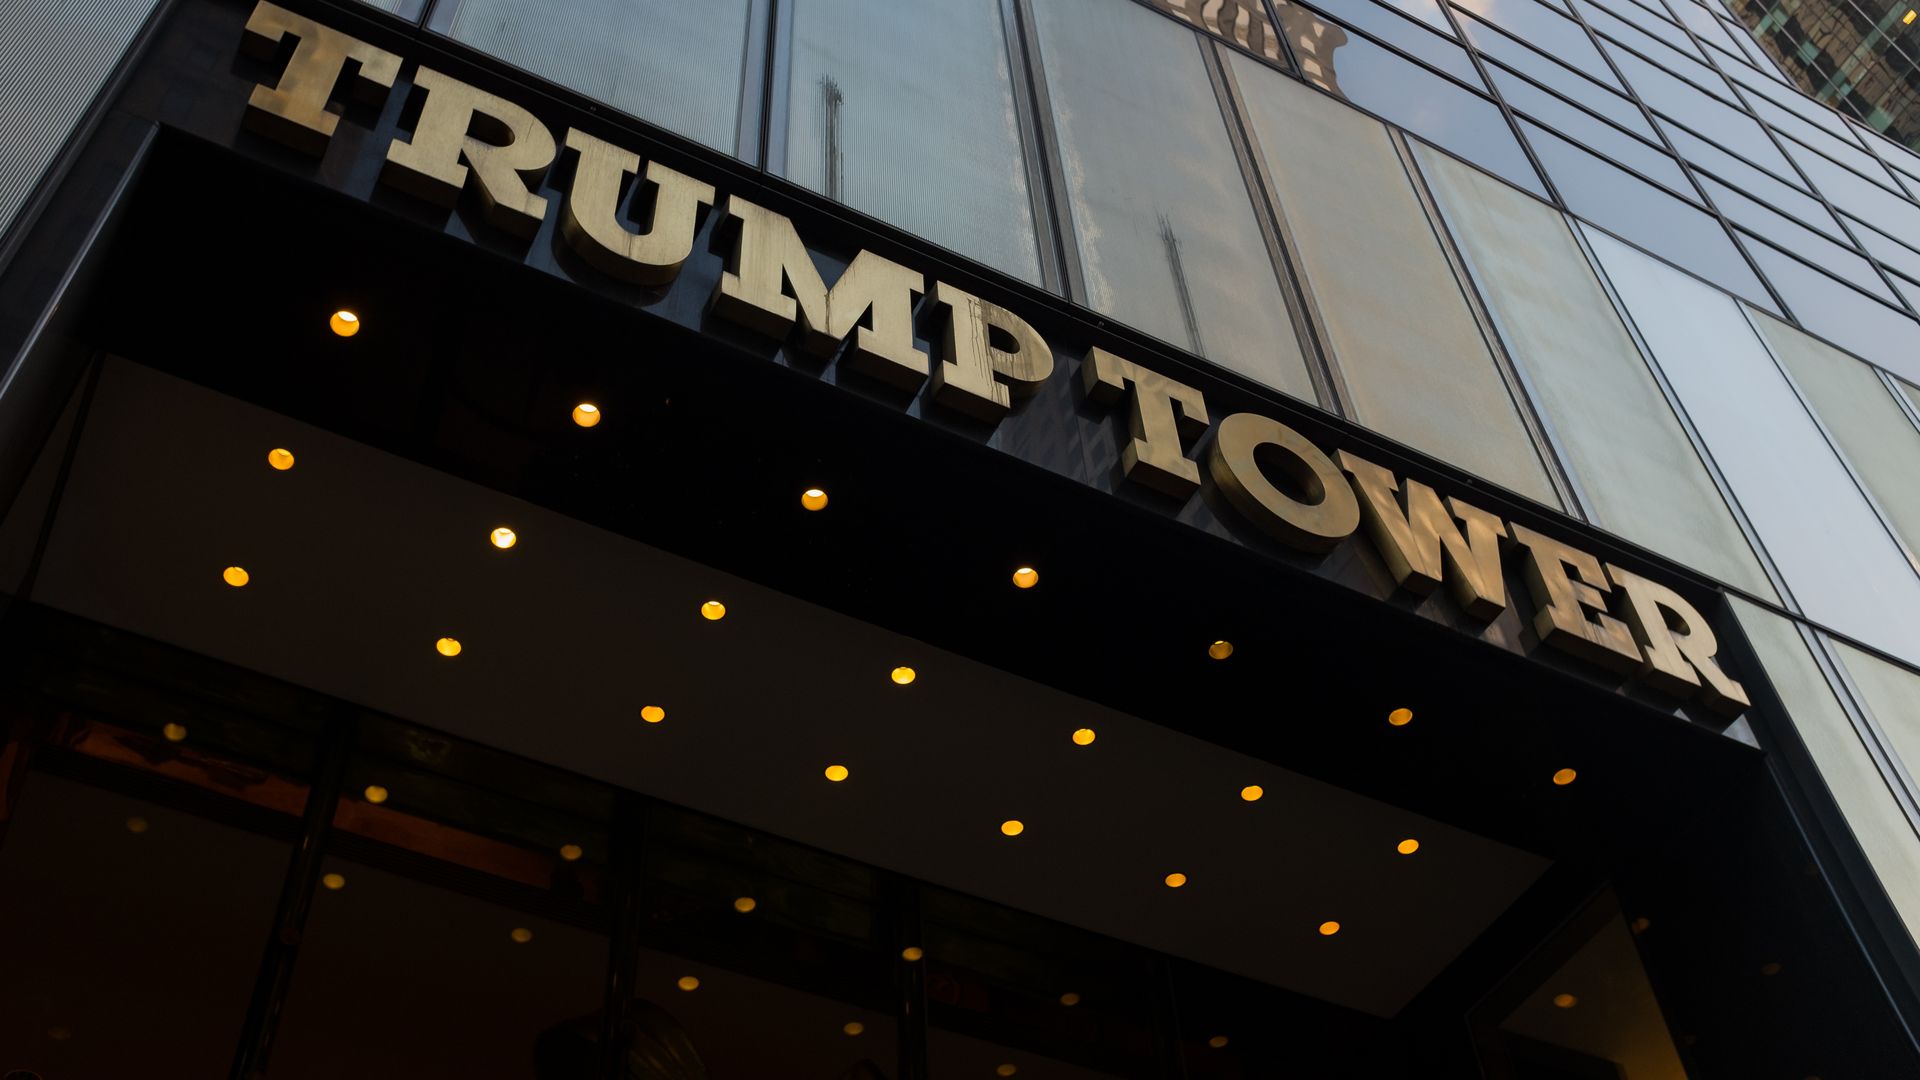  A general view of the sign and exterior of Trump Tower entrance.